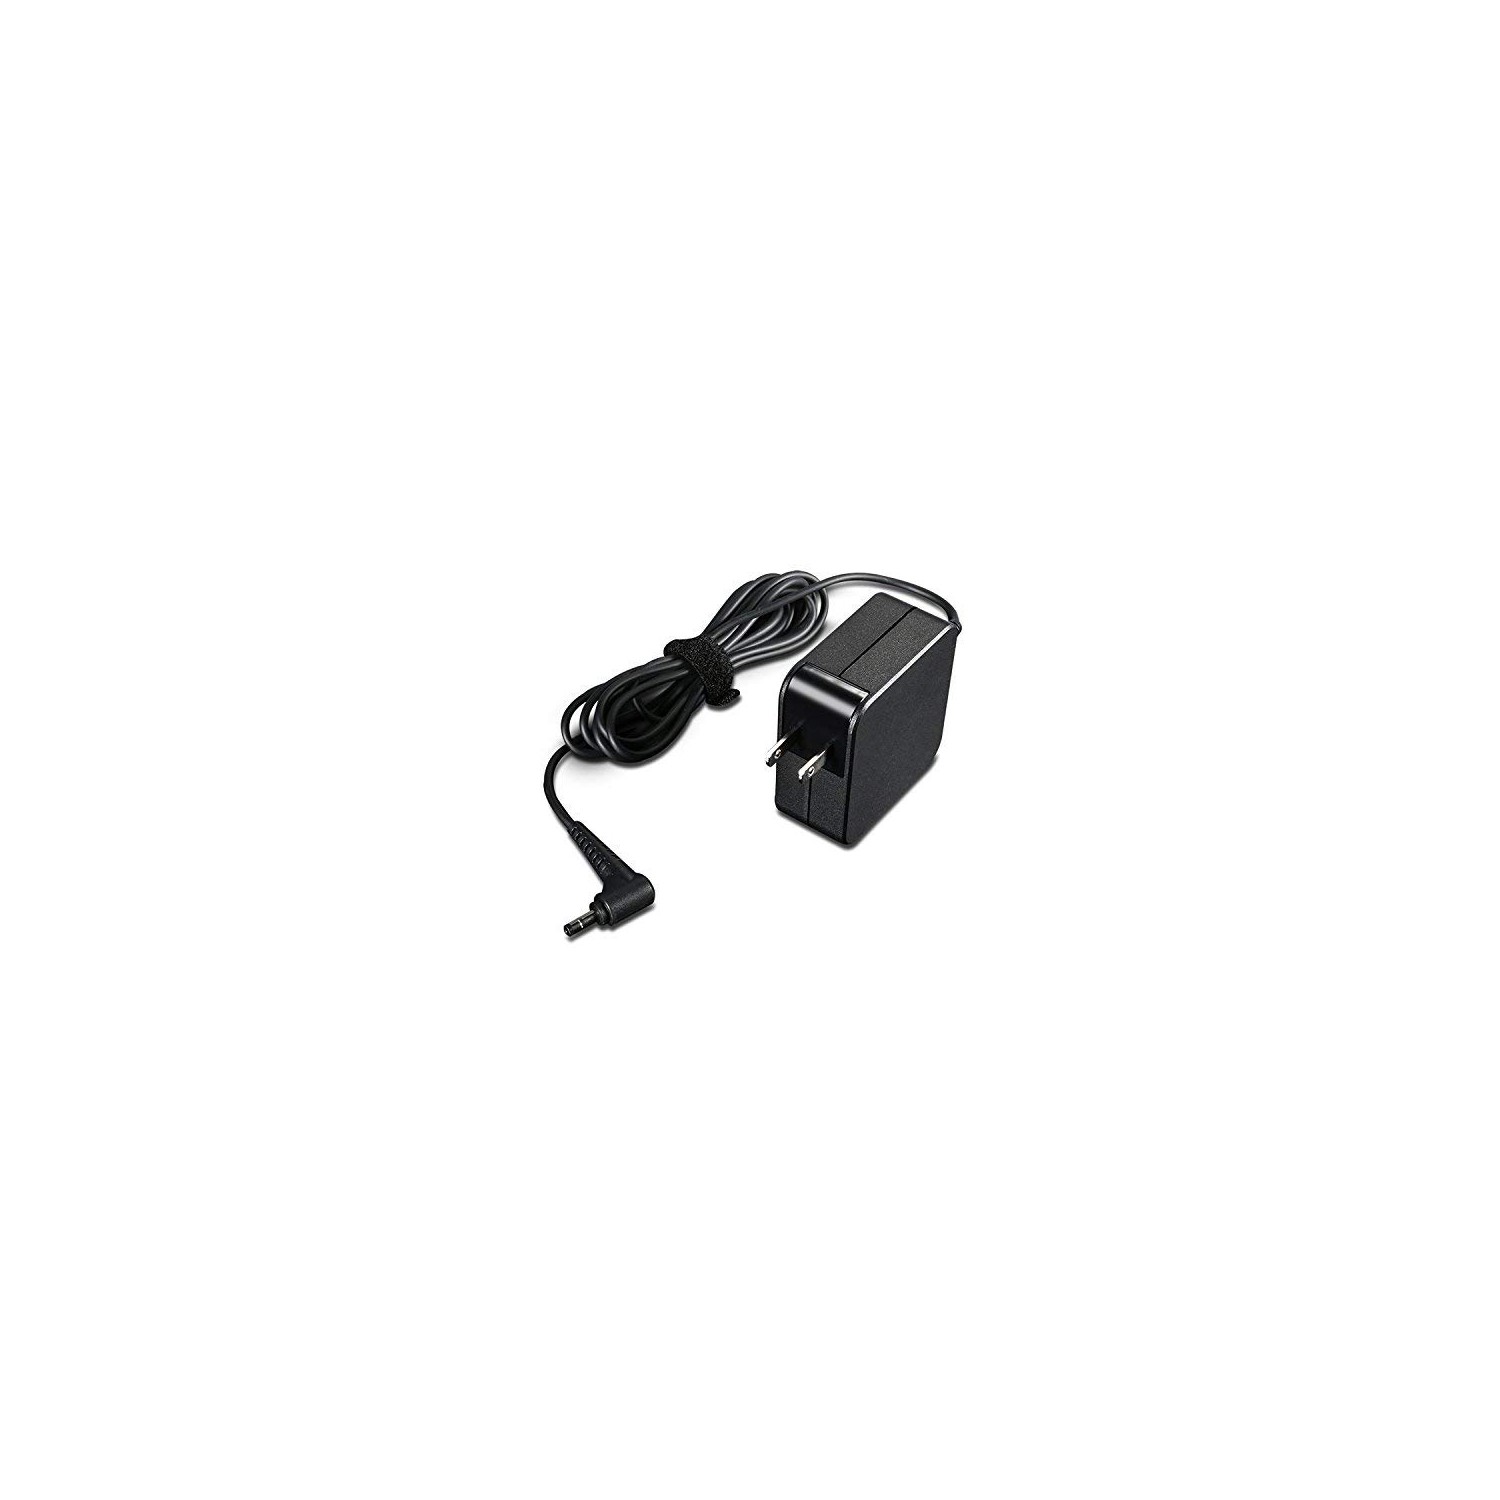 NA LENOVO 45W COMPUTER CHARGER ROUND TIP AC WALL ADAPTER (GX20K11838)